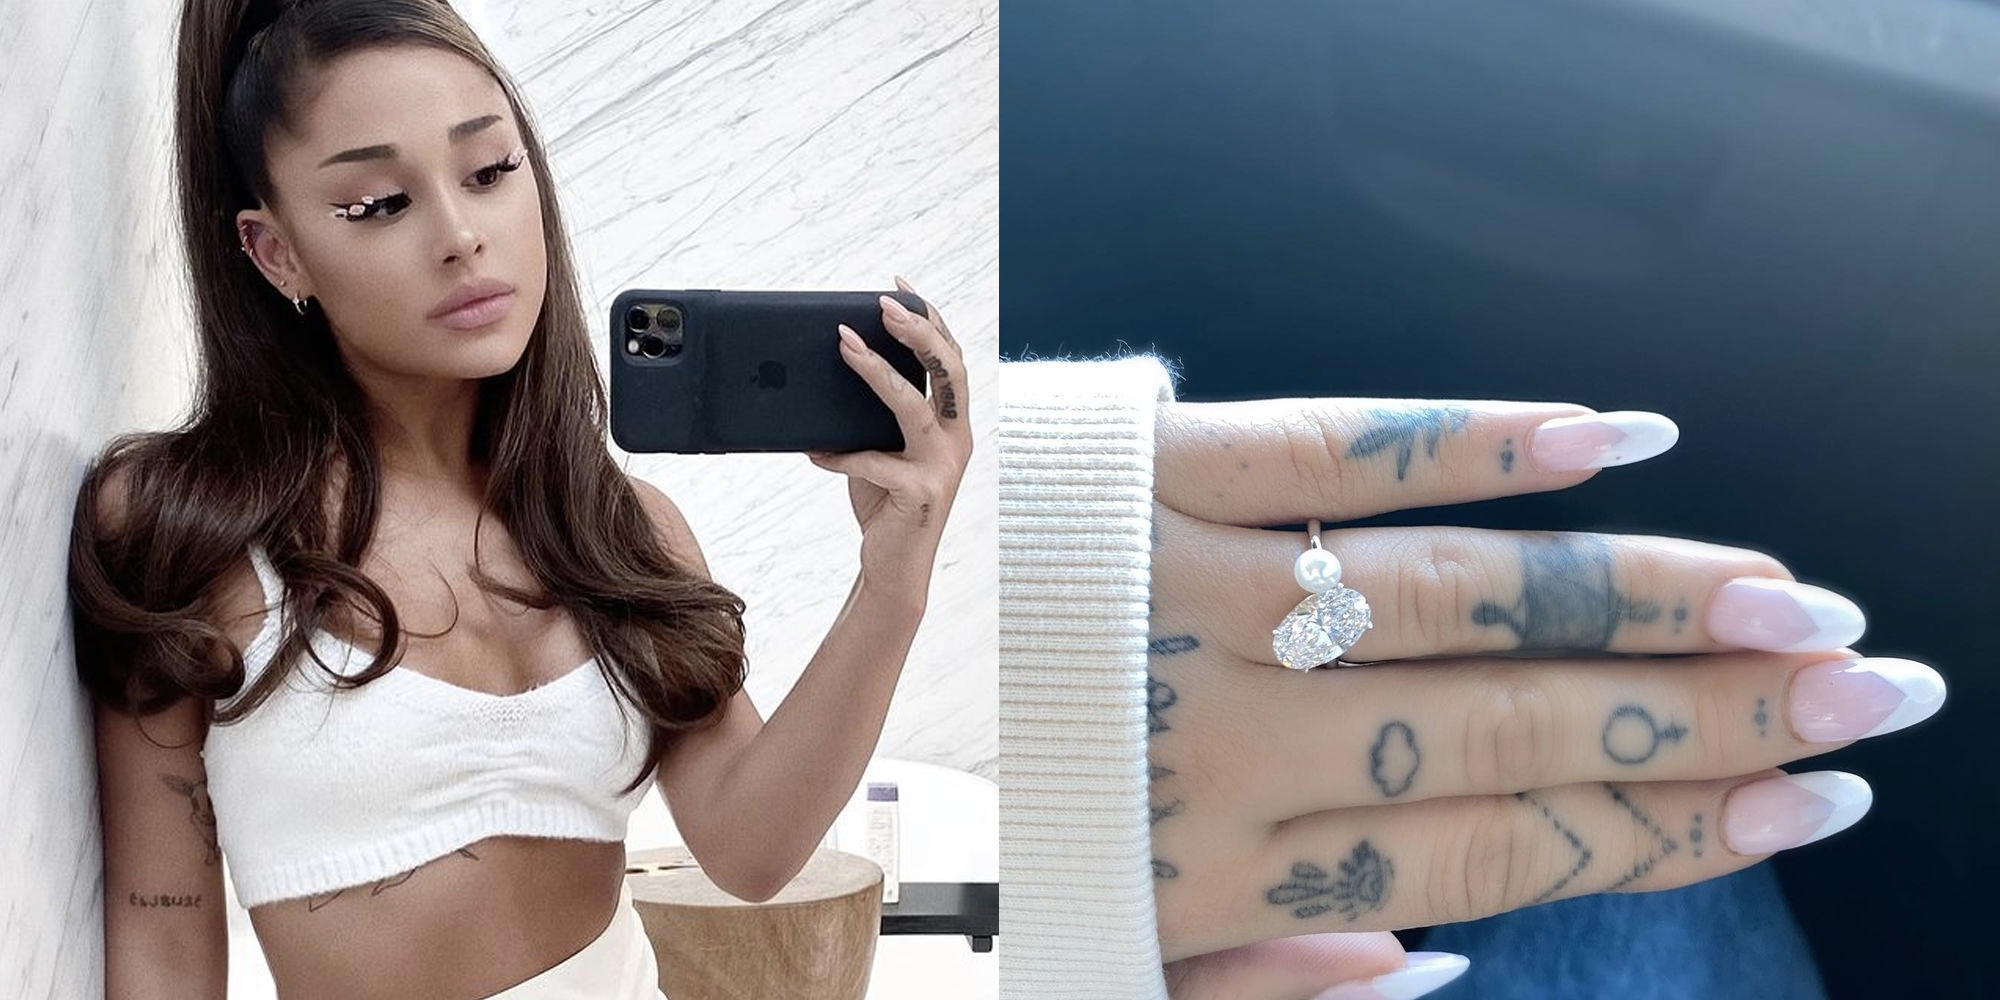 Ariana Grande's Engagement Ring Has A Touching Story Behind It